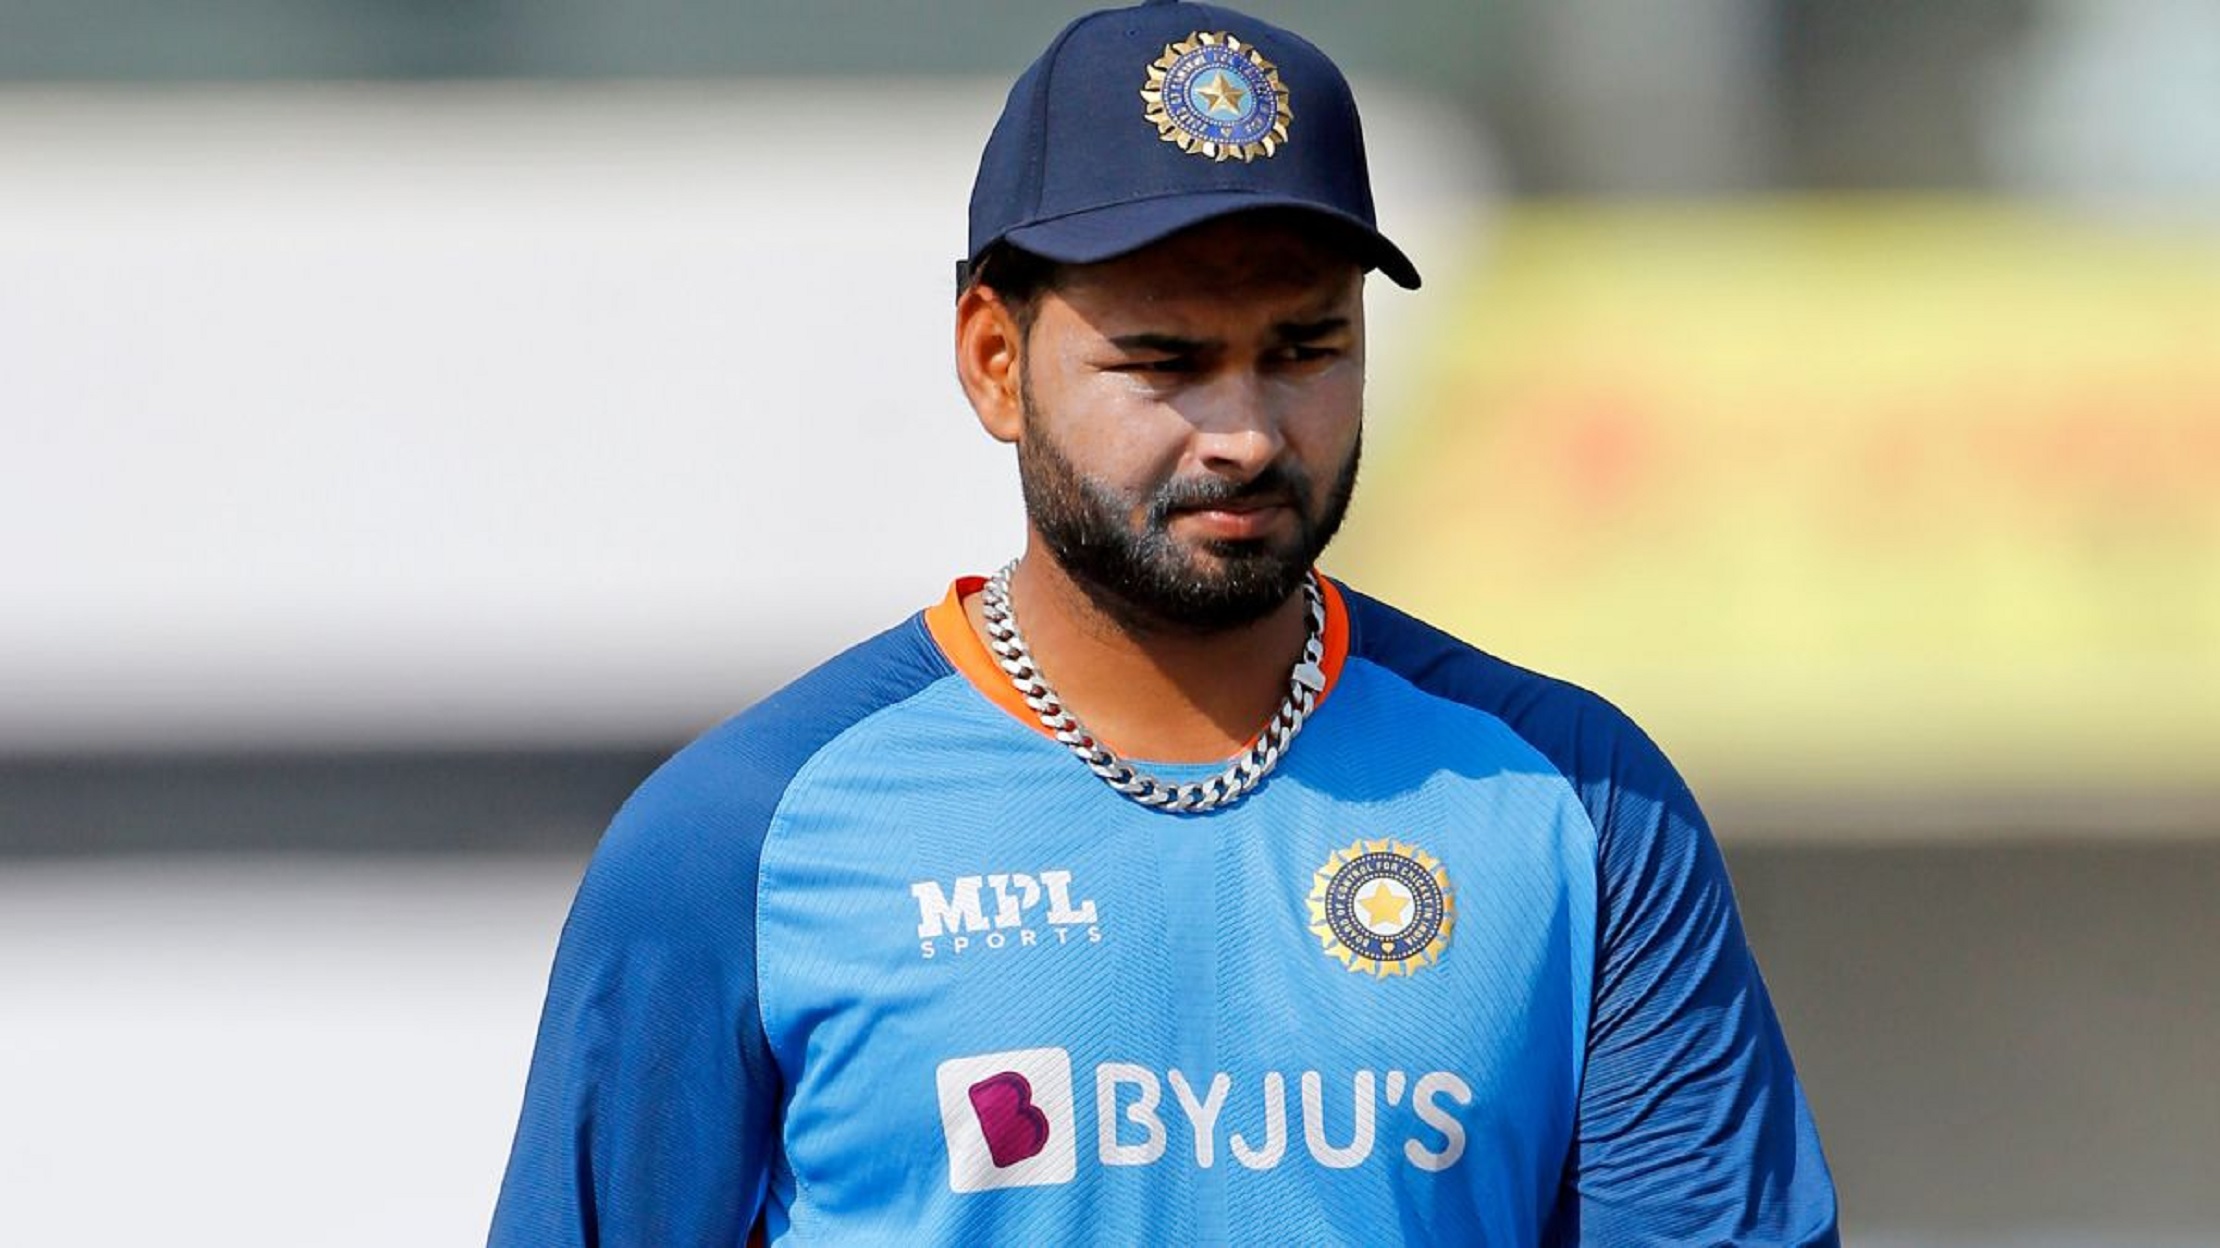 “I am ready for the challenges” Rishabh Pant tweets for the first time after horrific car crash